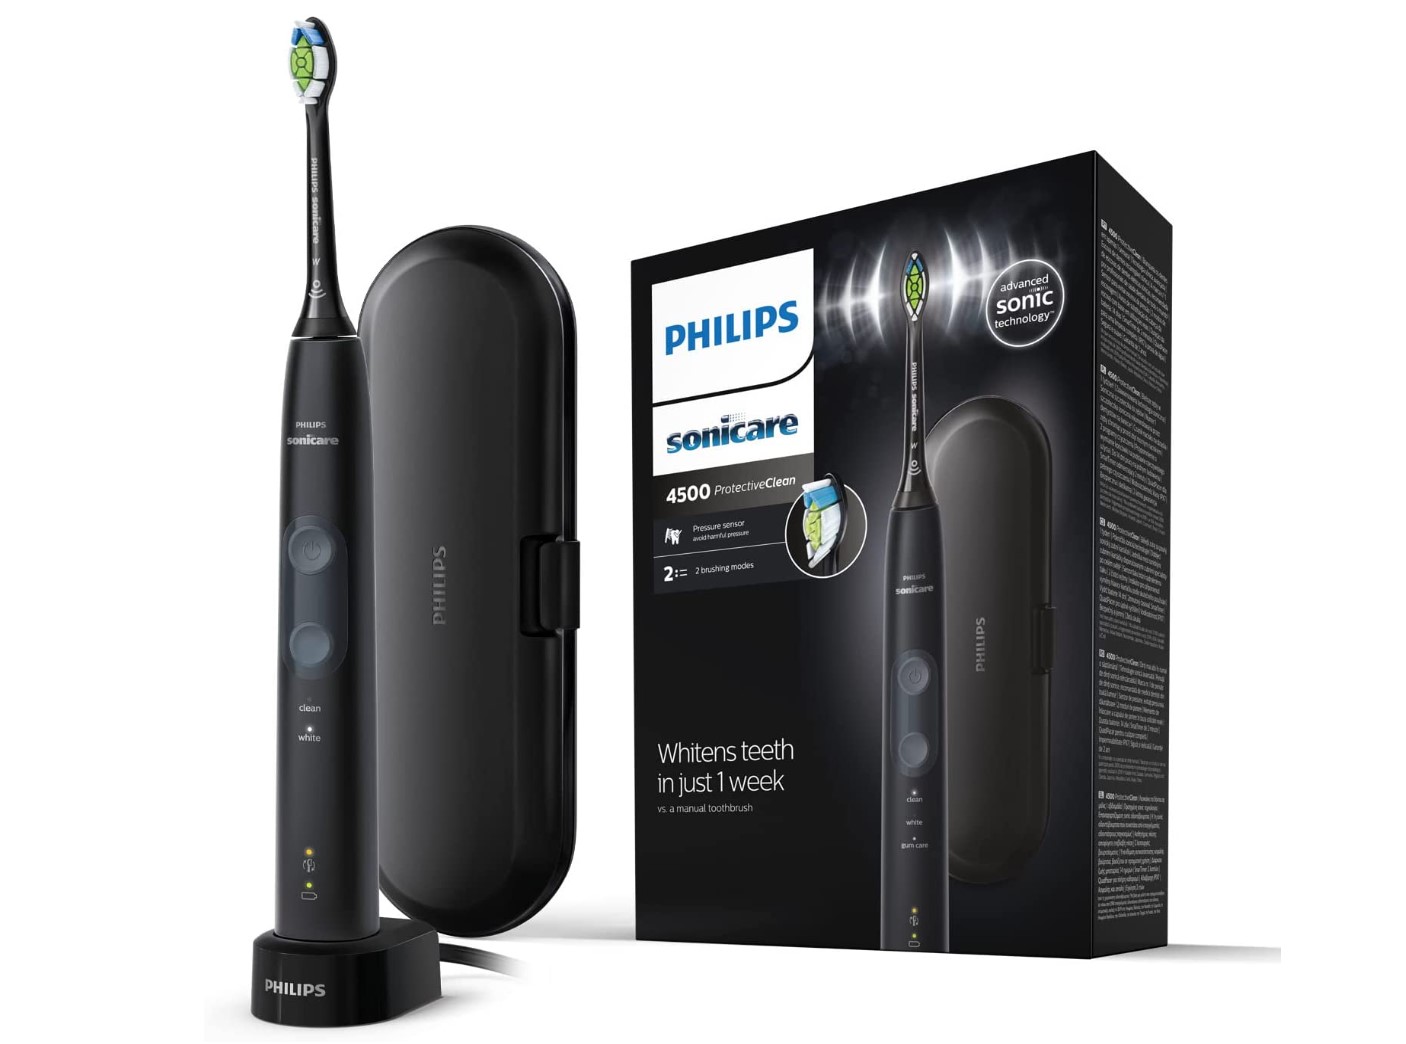 TOP 03. Philips Sonicare 4500